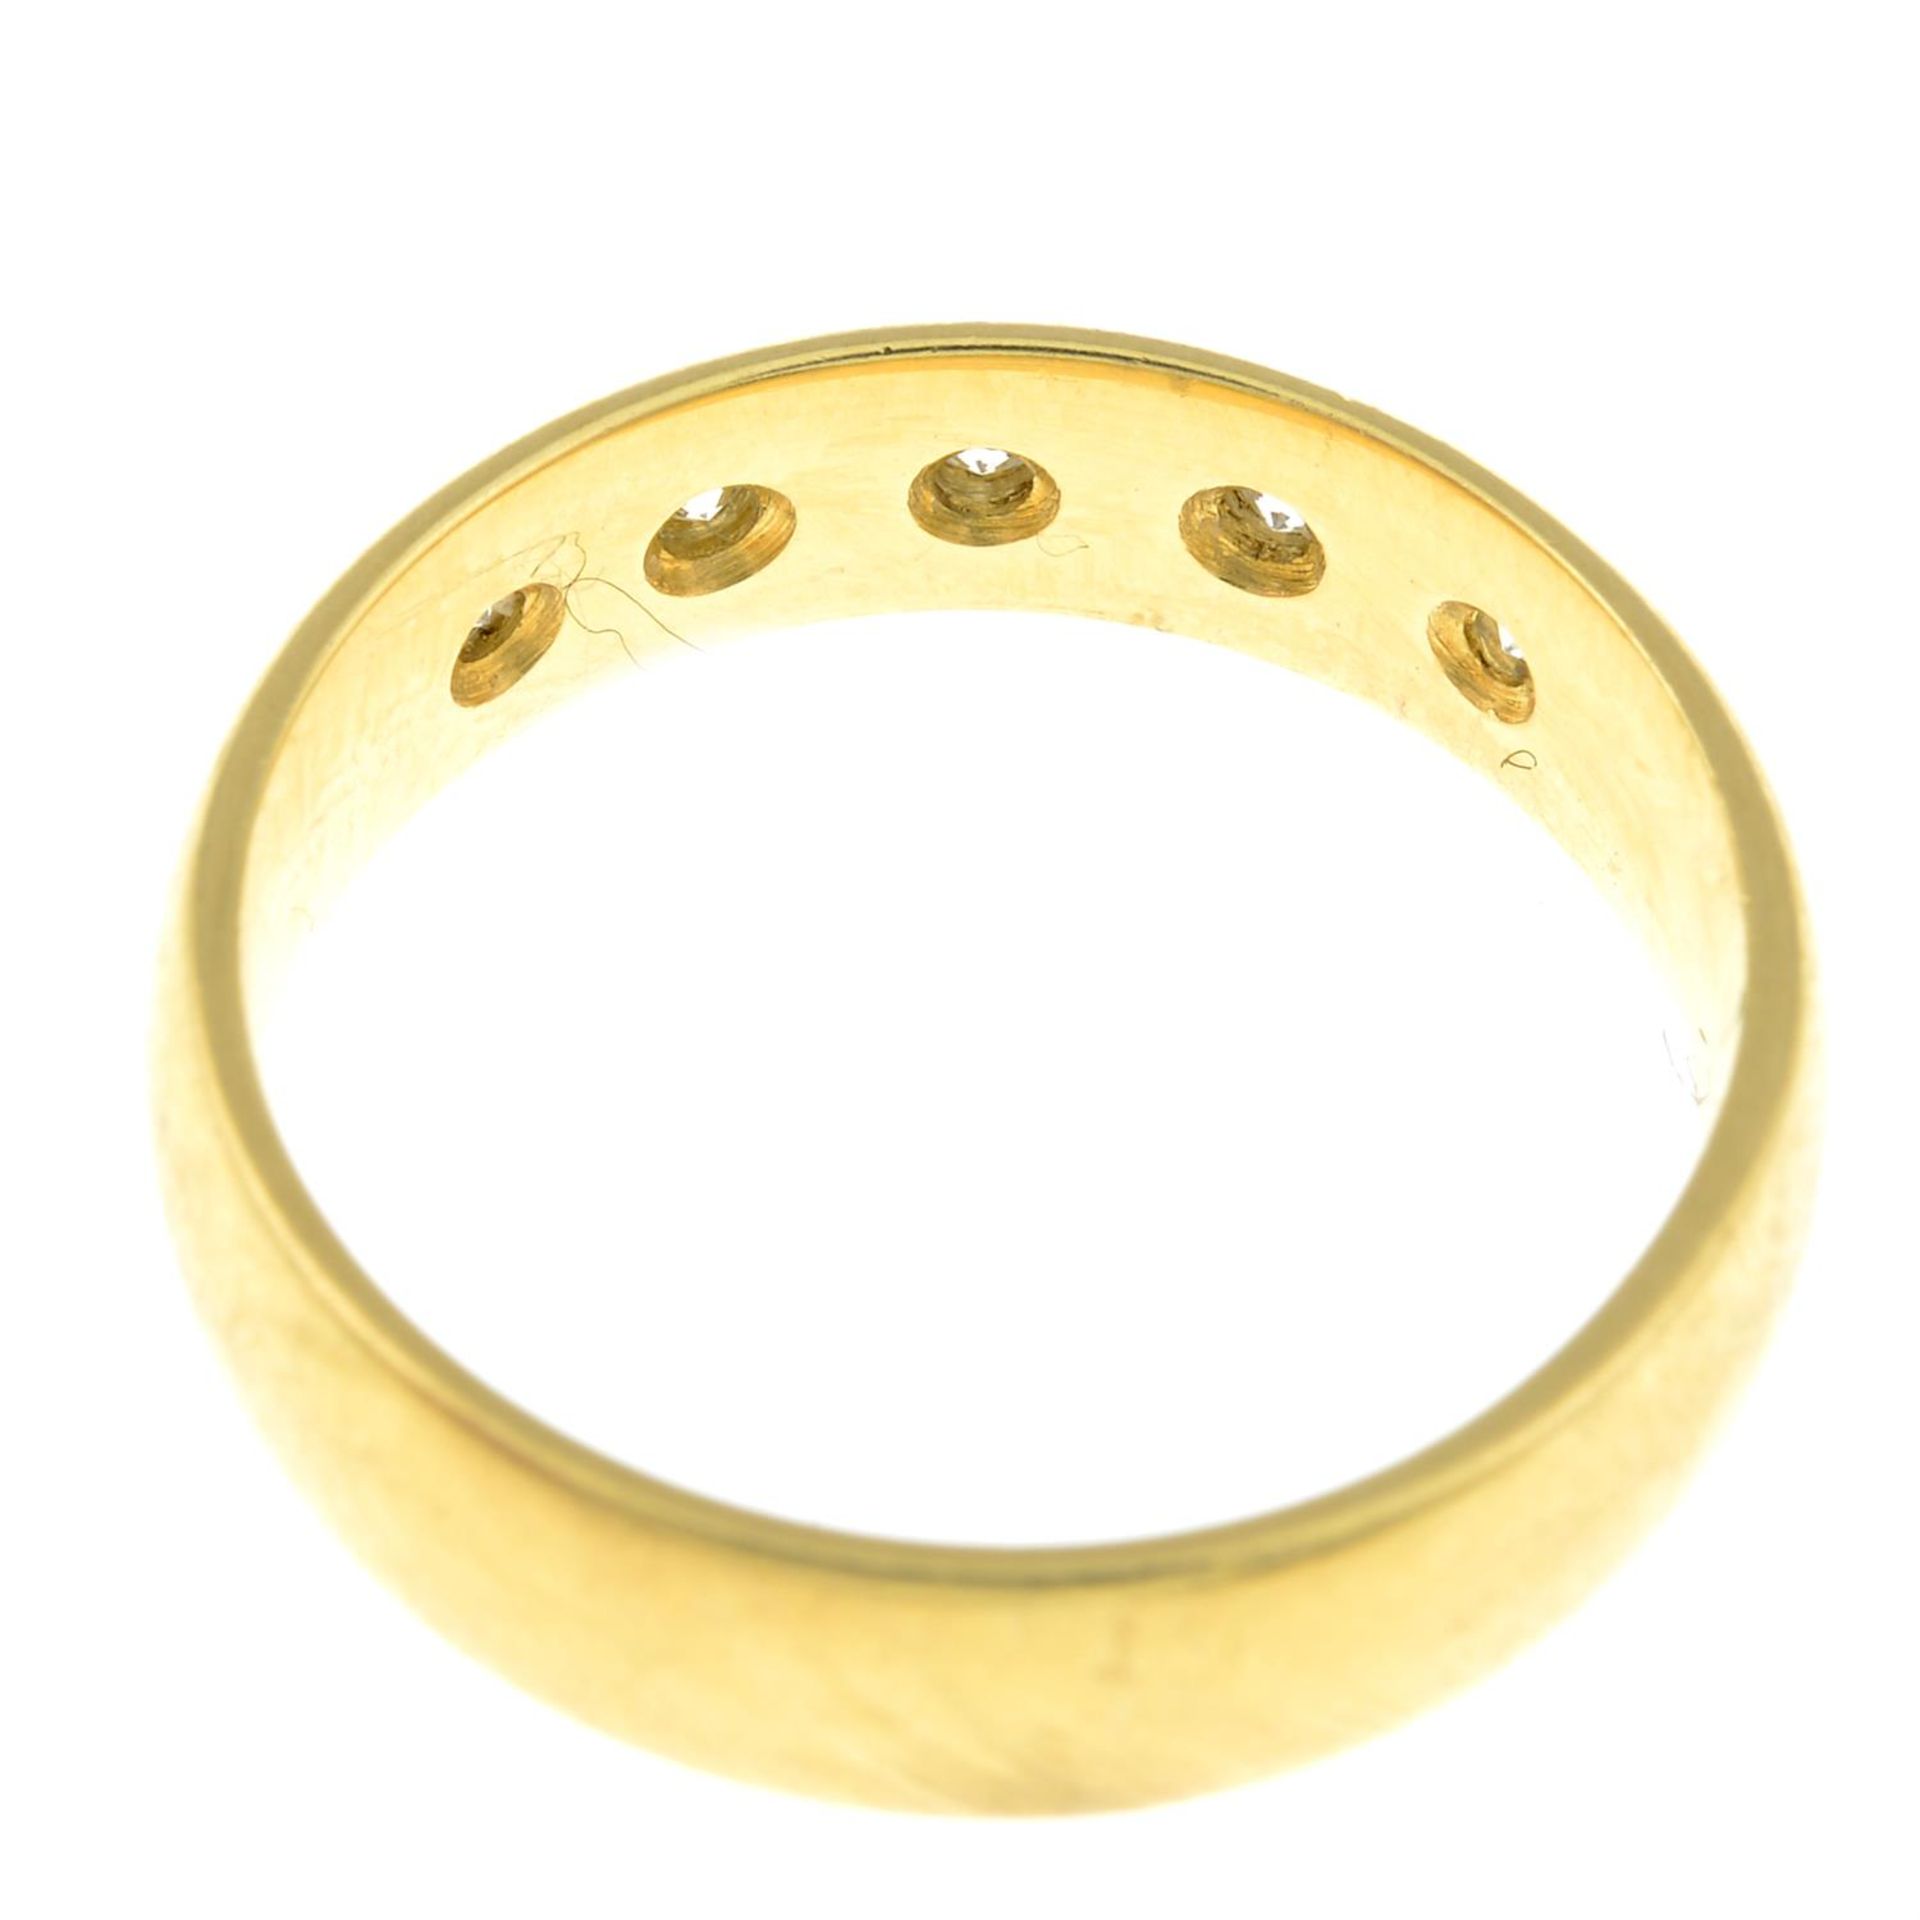 An 18ct gold band ring, with diamond highlights. - Image 2 of 2